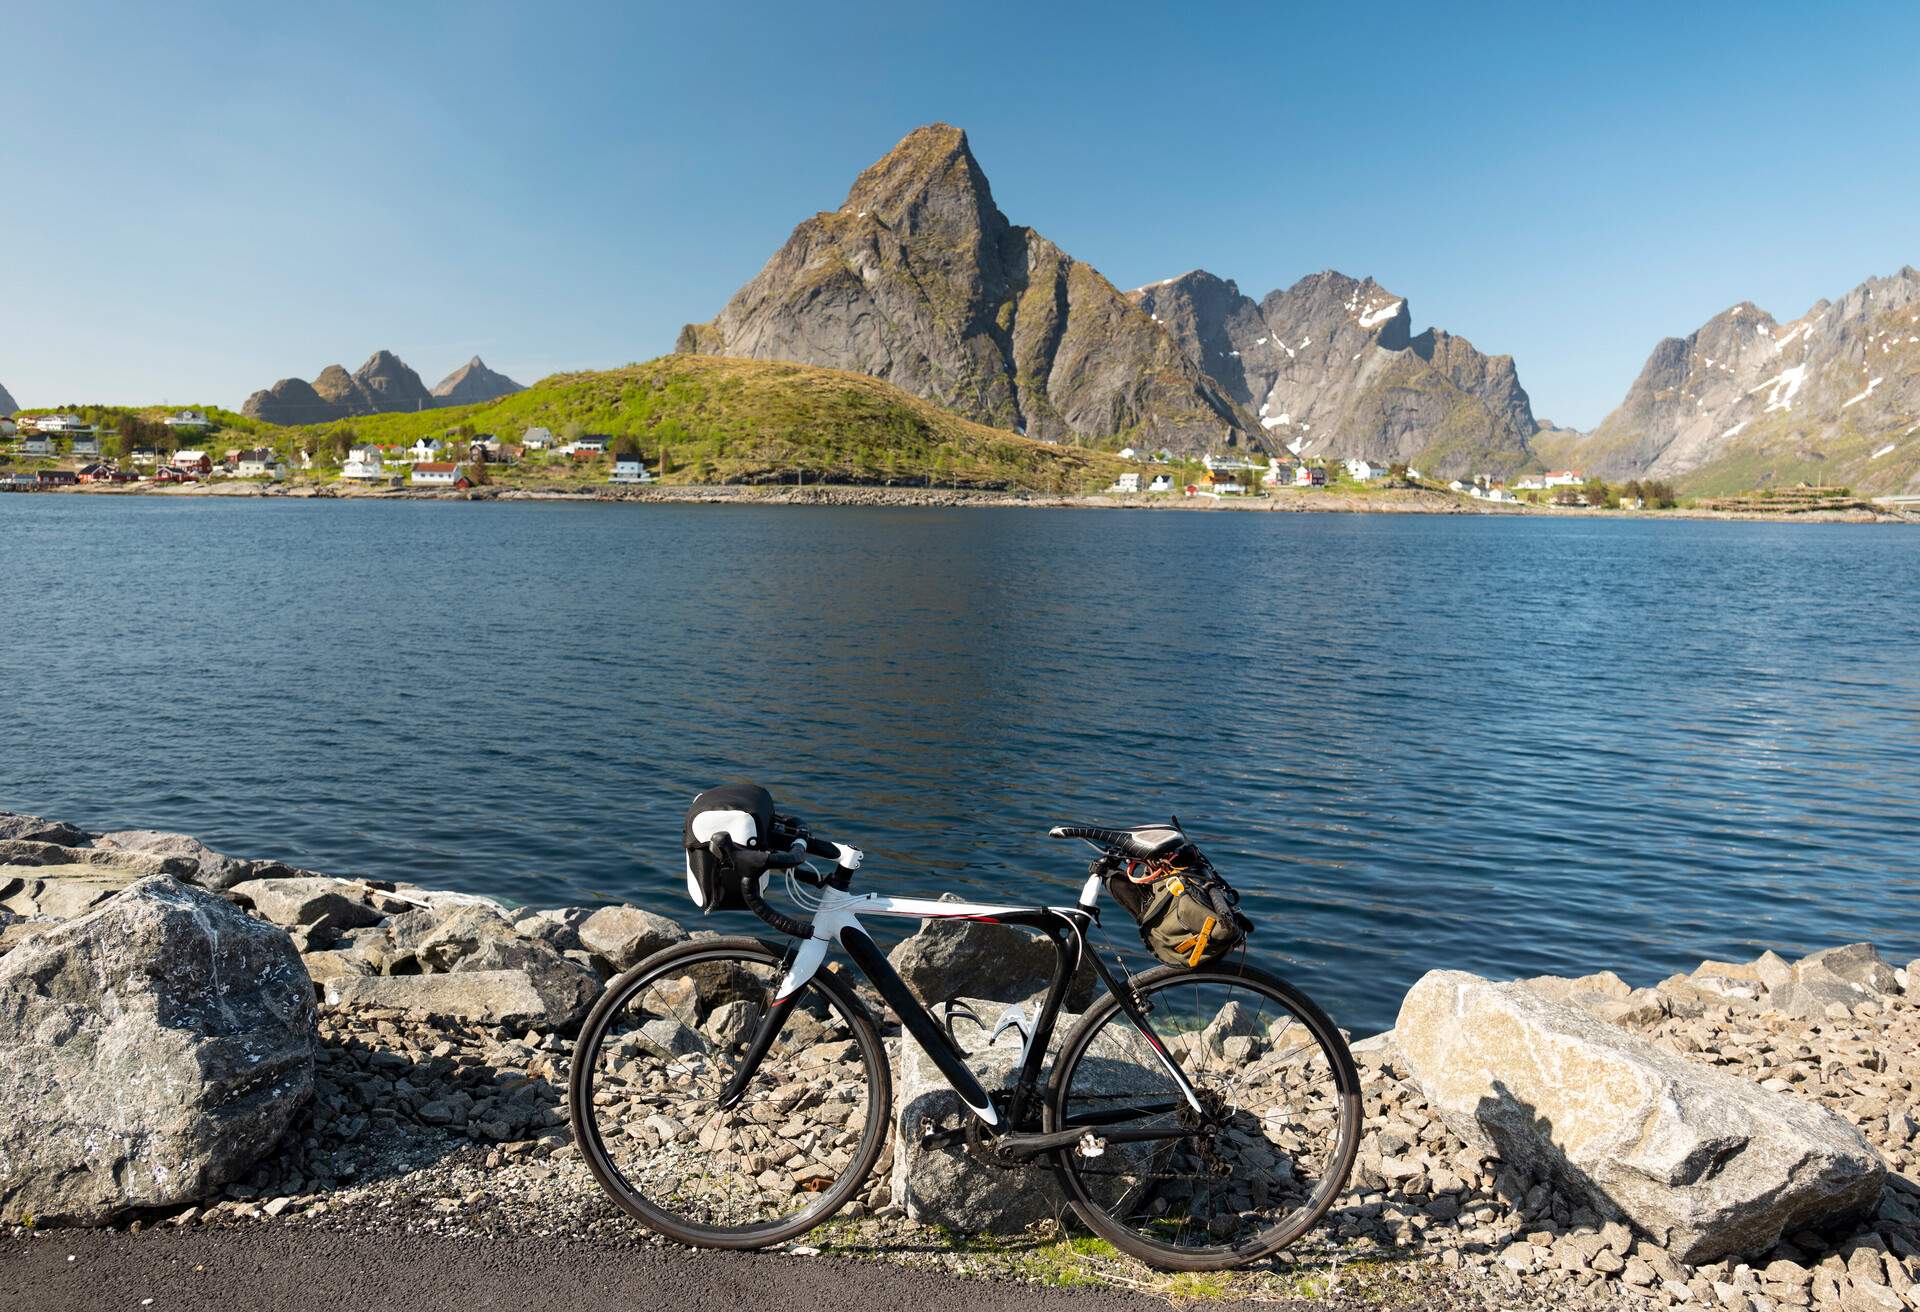 Cycle touring is a great way to get around the Lofoten Islands. The roads are mostly low lying and cycling friendly, skirting the coastline. The idea is to travel light and enjoy the stunning scenery as seen in this image of Reine.